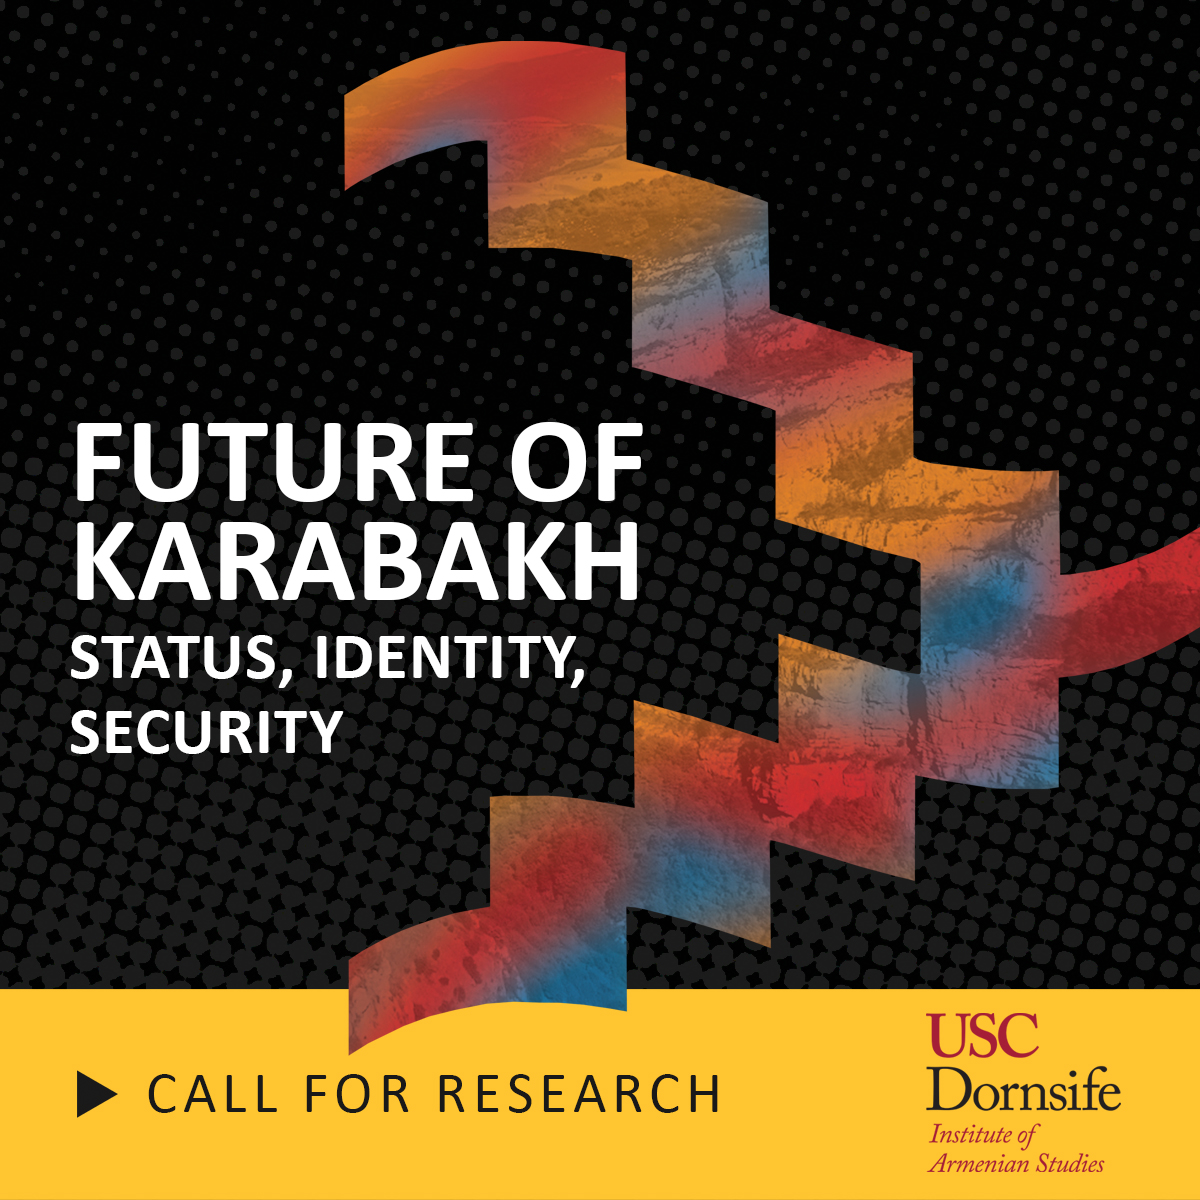 USC Institute of Armenian Studies - Future of Karabakh, Status, Identity, and Security - Call for Research